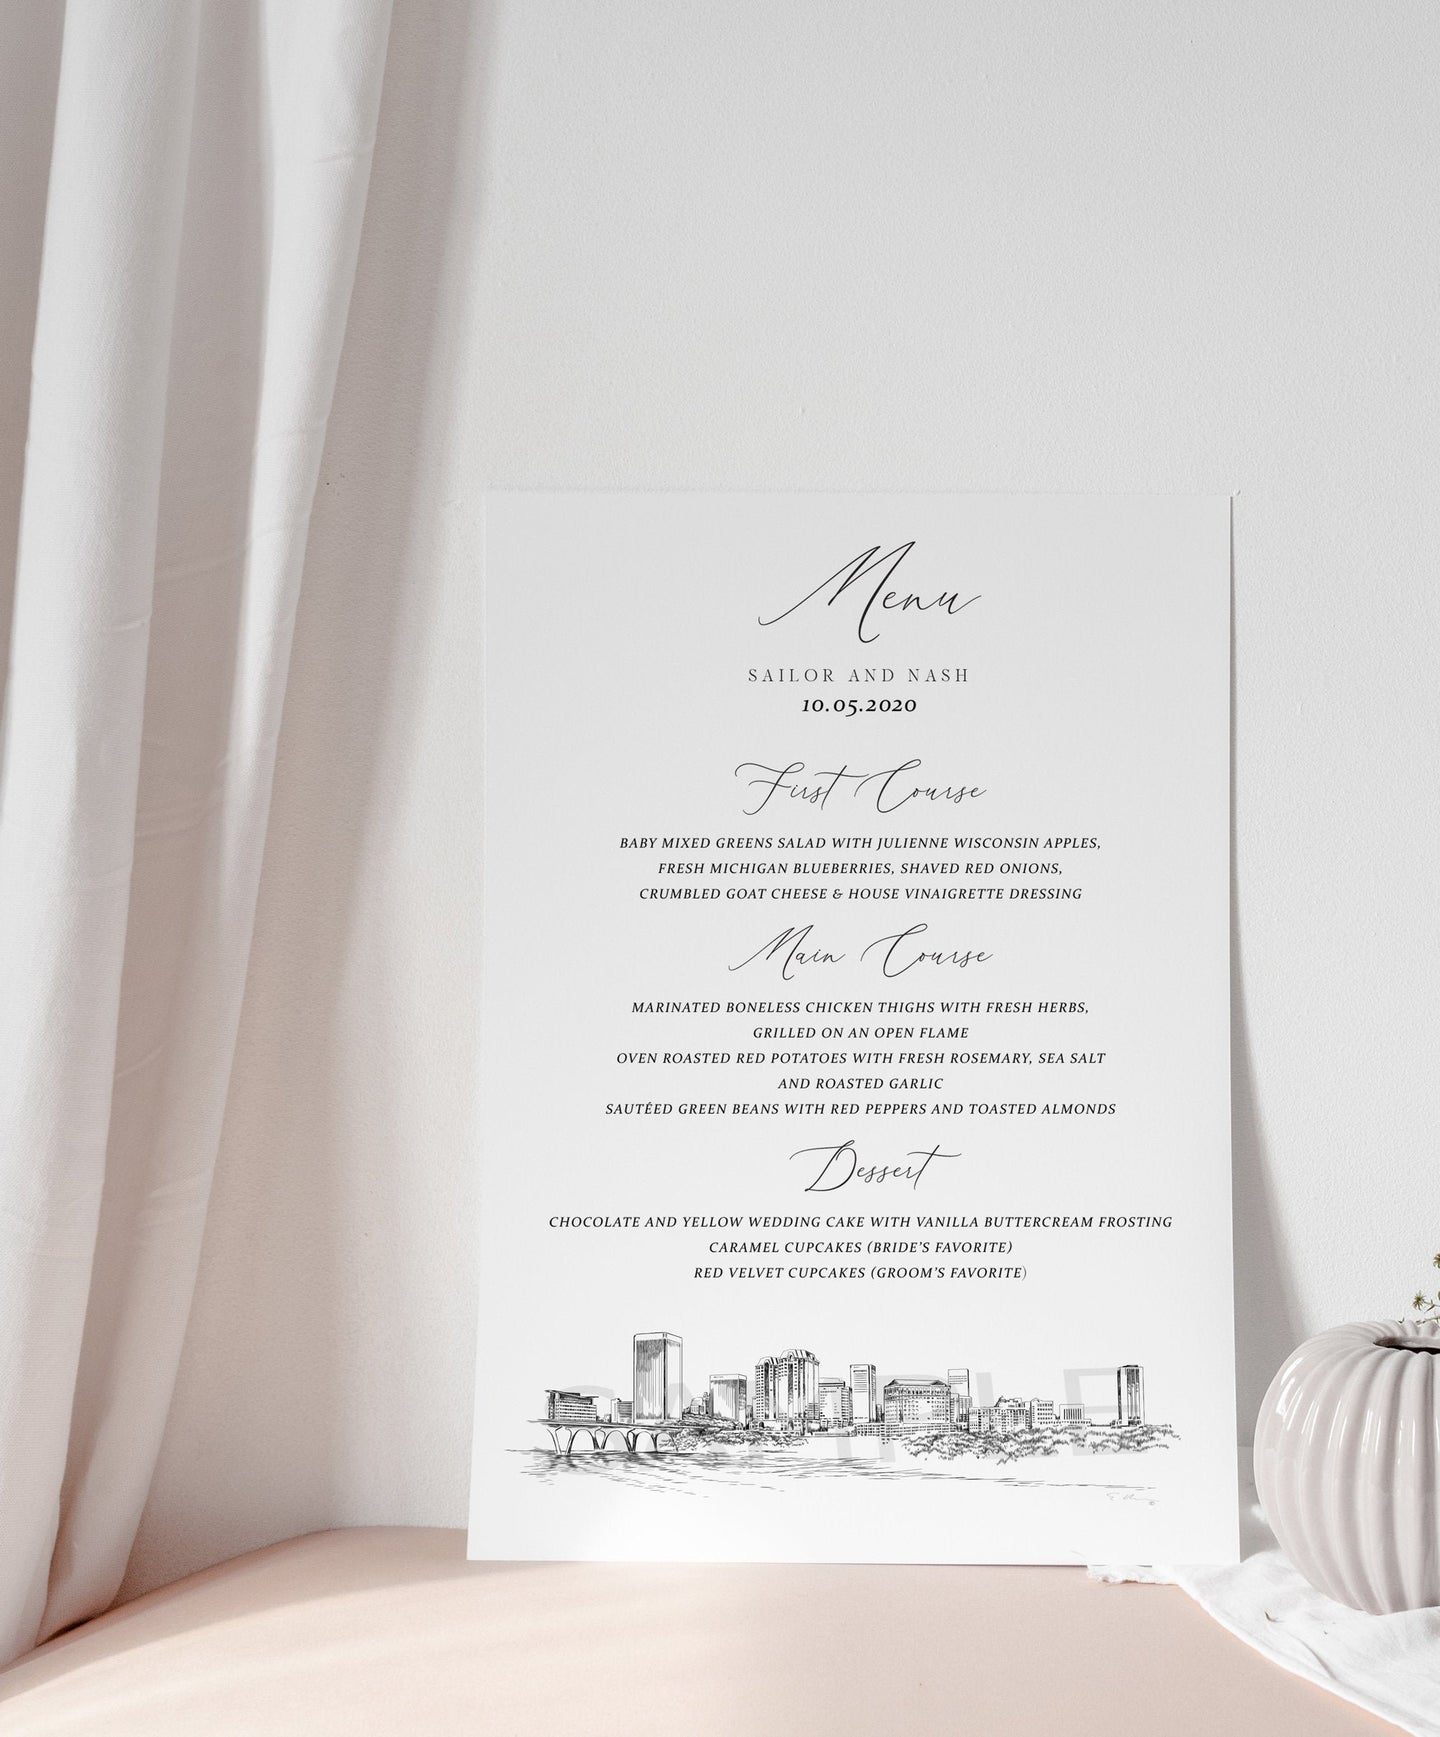 Richmond, VA Skyline Menu Cards, Virginia, Wedding, Day of Event, Reception, Dinner Menus, Corporate Events, Parties (Sold in sets of 25)